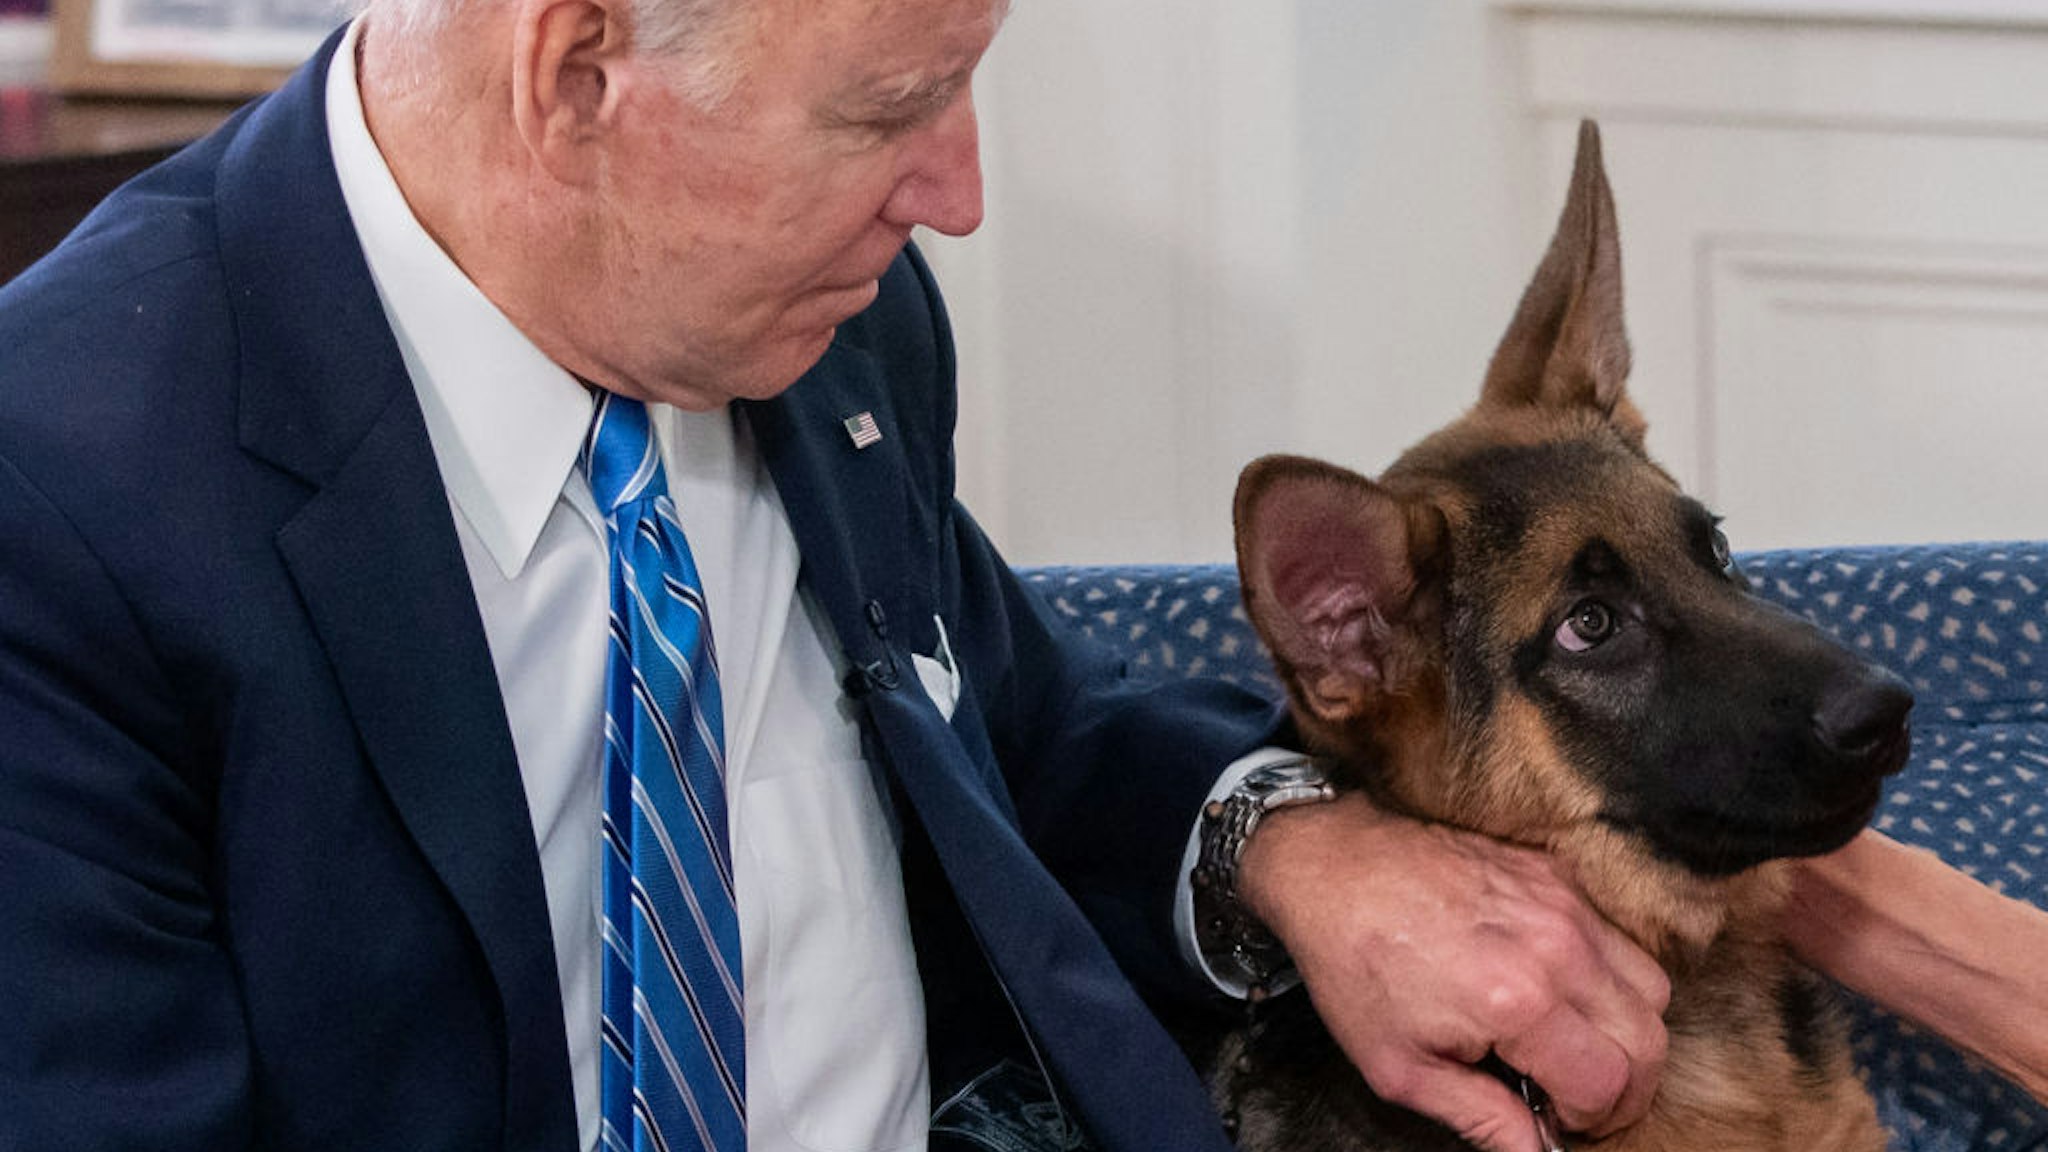 US President Joe Biden pets his new dog Commander as he speak virtually with military service members to thank them for their service and wish them a Merry Christmas, from the South Court Auditorium of the White House in Washington, DC, on December 25, 2021. (Photo by SAUL LOEB / AFP) (Photo by SAUL LOEB/AFP via Getty Images)